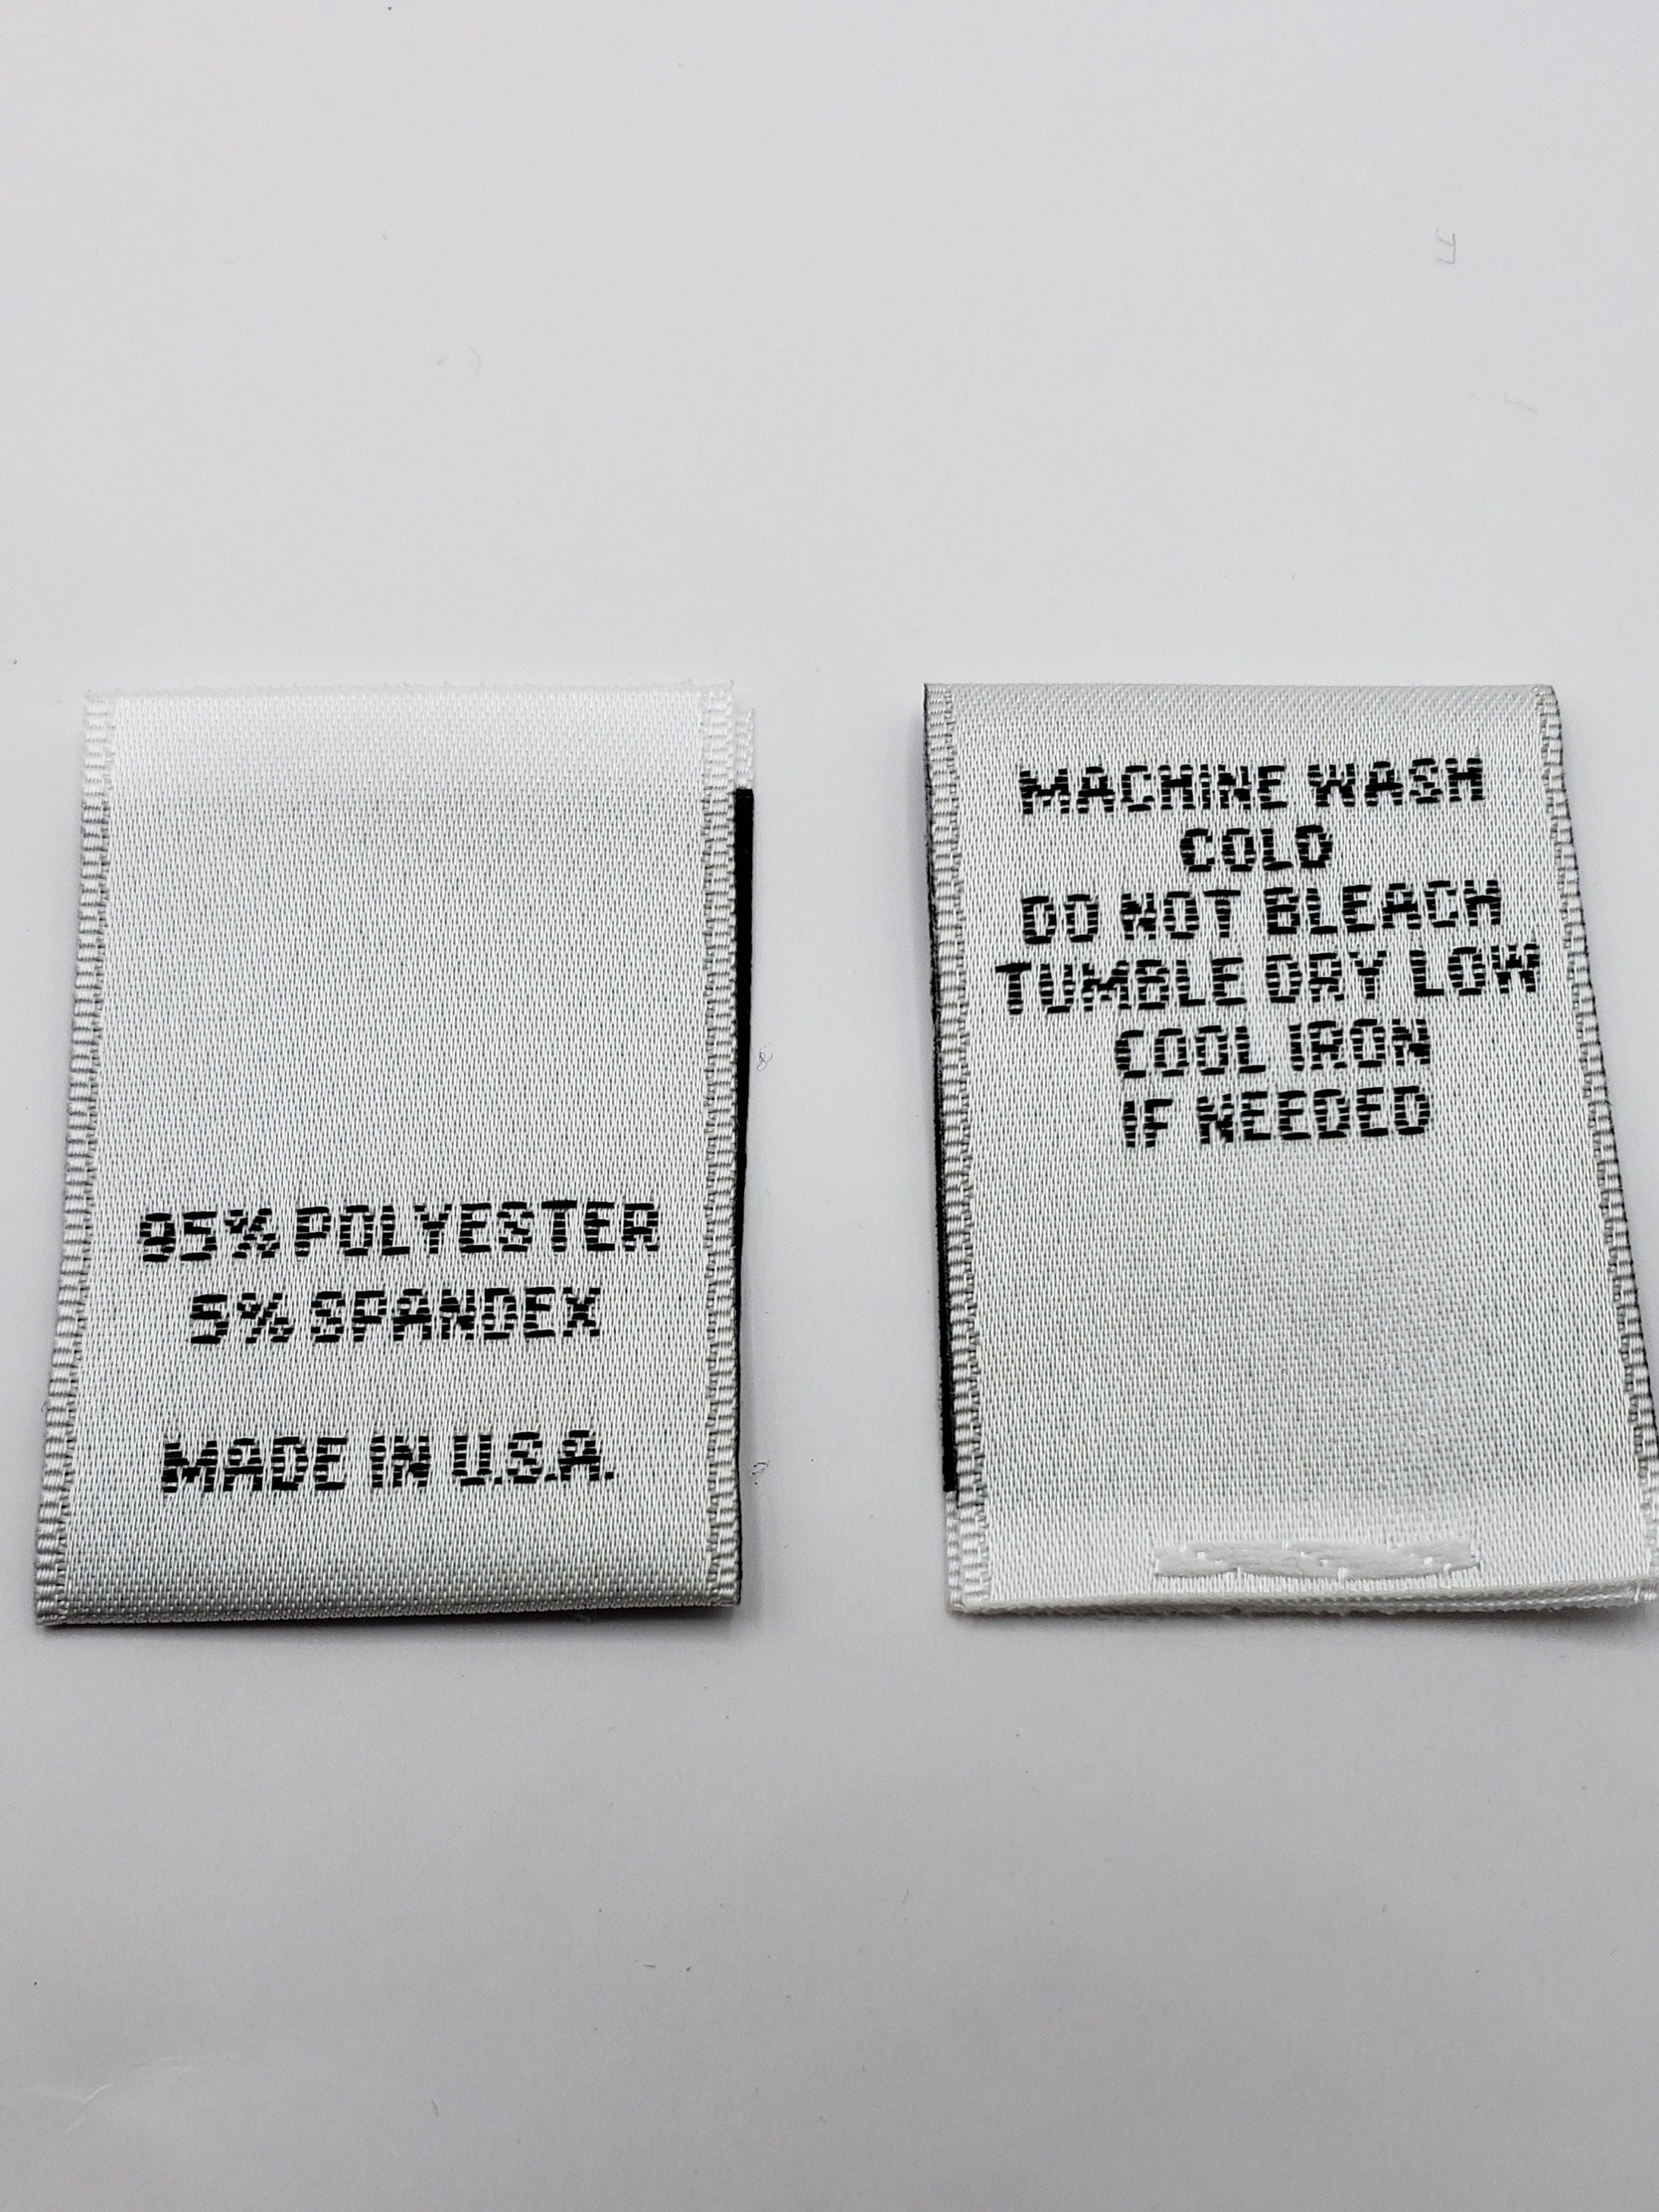 Cotton Woven Label with 2 lines of block text